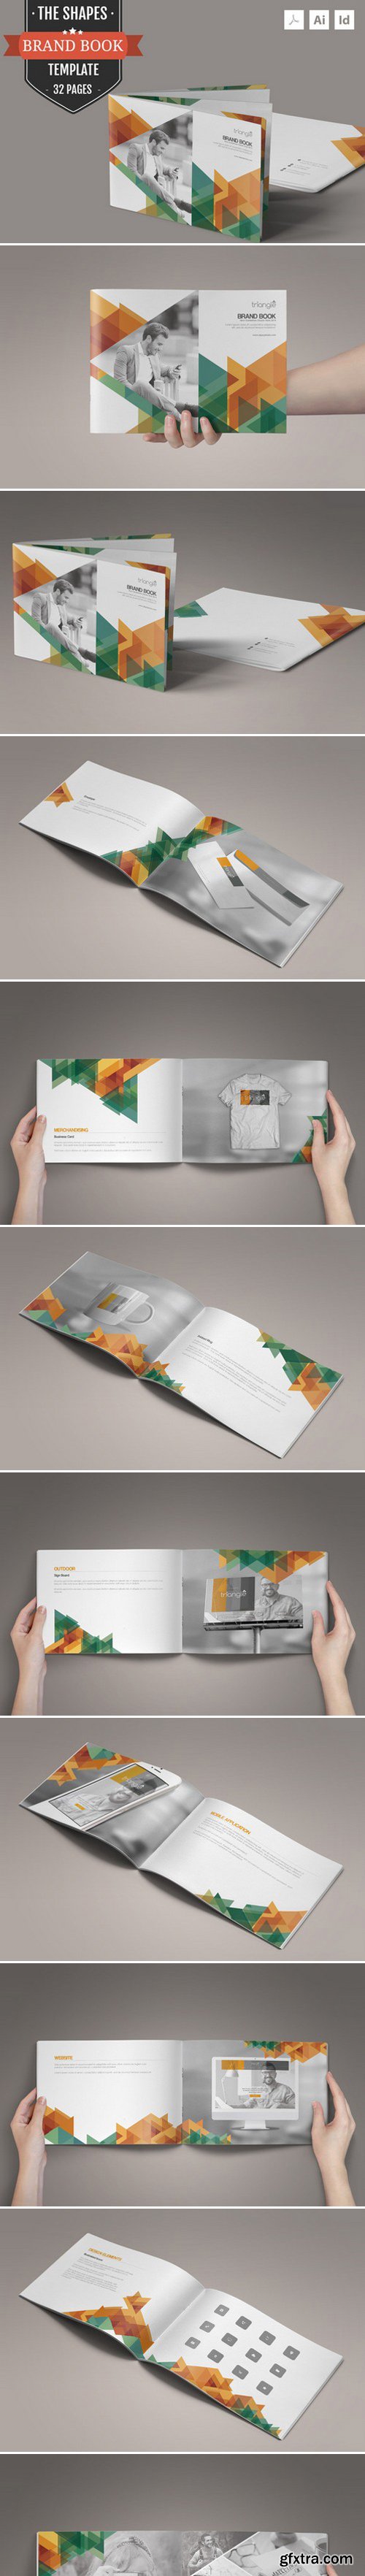 CM - The Shapes-Brand Guidelines Template 395534